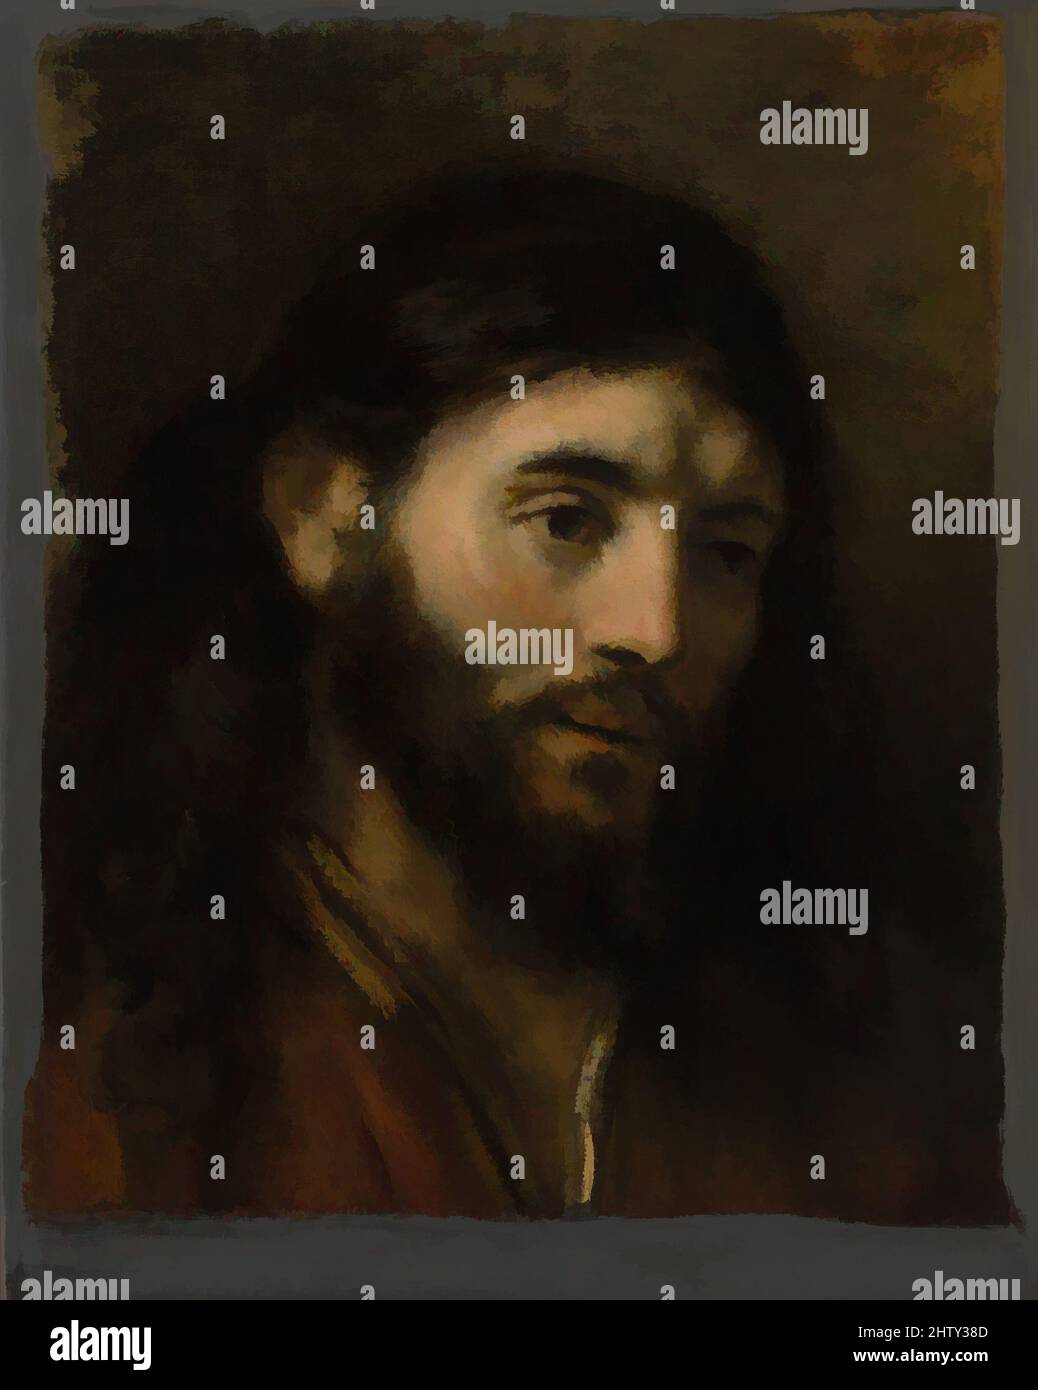 Art inspired by Head of Christ, Oil on canvas, 16 3/4 x 13 1/2 in. (42.5 x 34.3 cm); with added strips 18 5/8 x 14 5/8 in. (47.3 x 37.1 cm), Paintings, Style of Rembrandt (Dutch, 1650s), Rembrandt painted this subject a number of times; three examples, one described as 'Een Christus, Classic works modernized by Artotop with a splash of modernity. Shapes, color and value, eye-catching visual impact on art. Emotions through freedom of artworks in a contemporary way. A timeless message pursuing a wildly creative new direction. Artists turning to the digital medium and creating the Artotop NFT Stock Photo